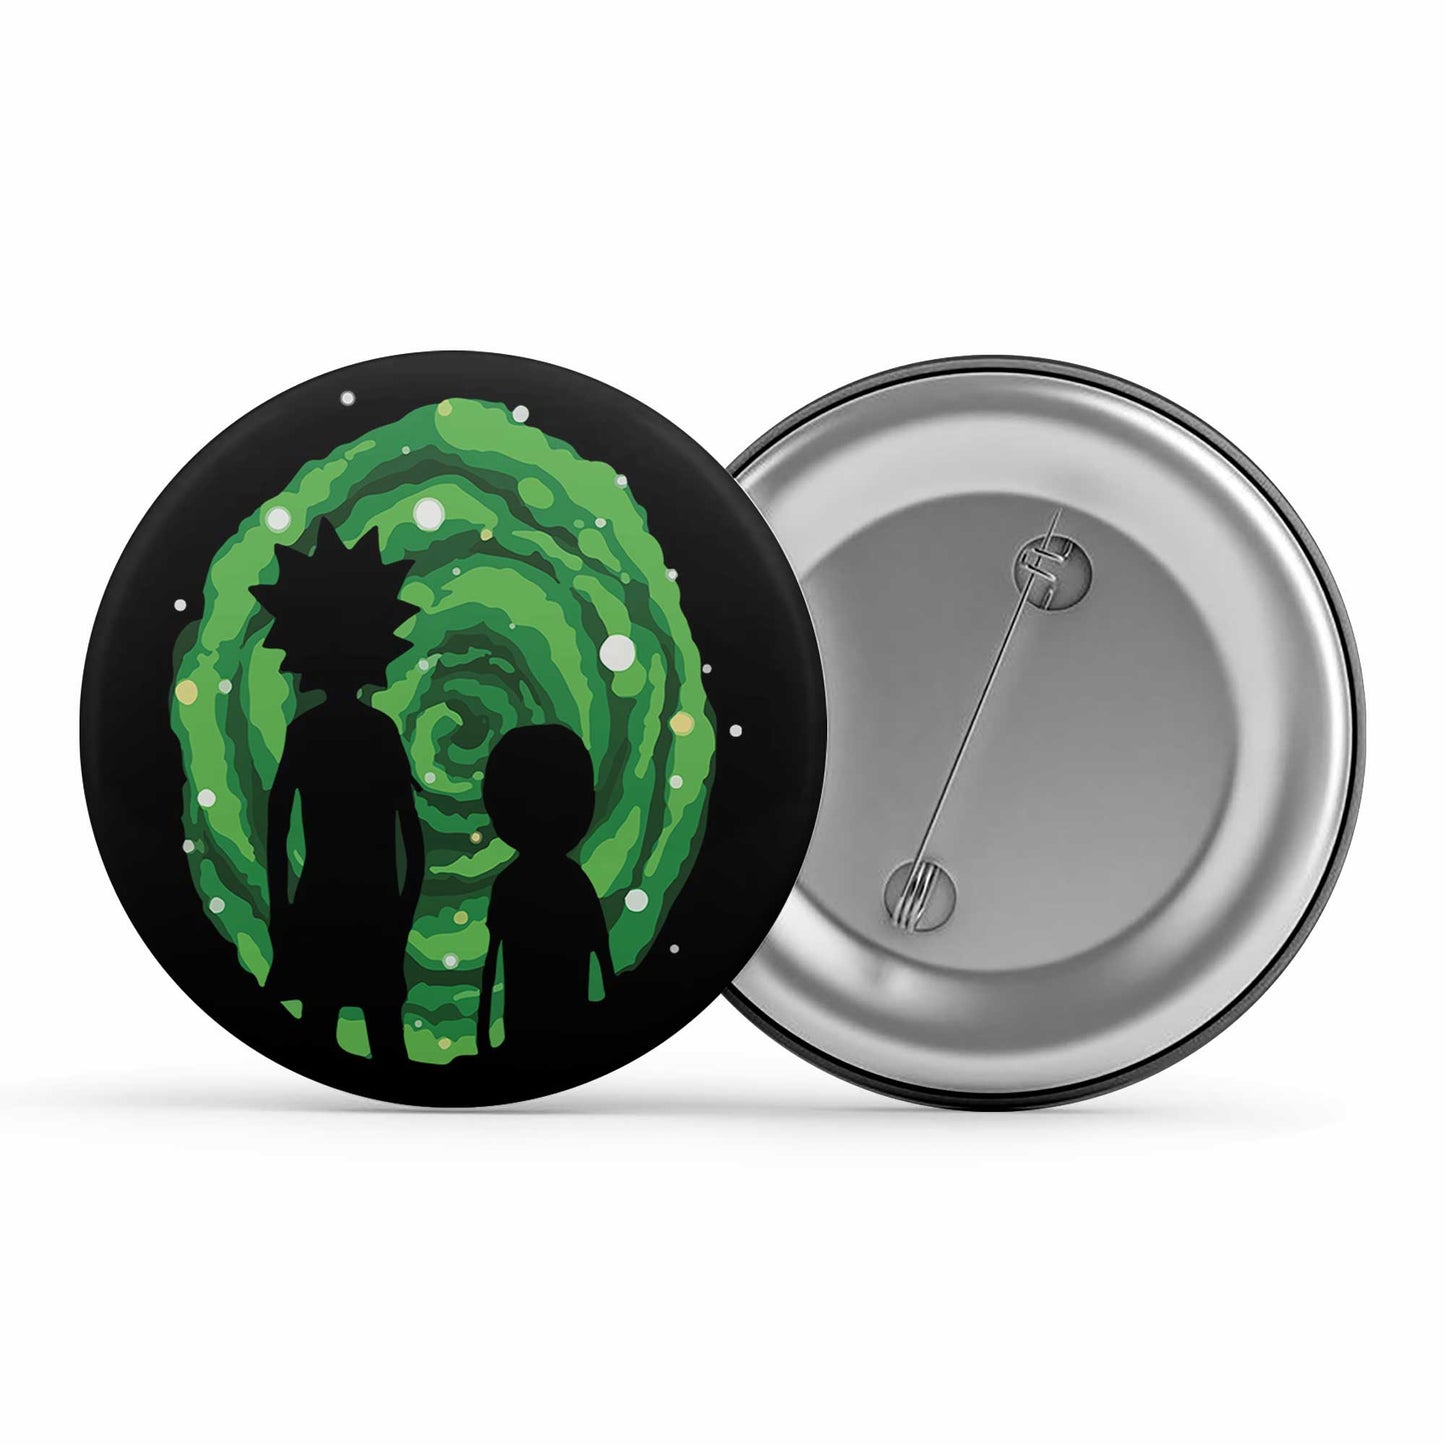 rick and morty portal badge pin button buy online india the banyan tee tbt men women girls boys unisex  rick and morty online summer beth mr meeseeks jerry quote vector art clothing accessories merchandise